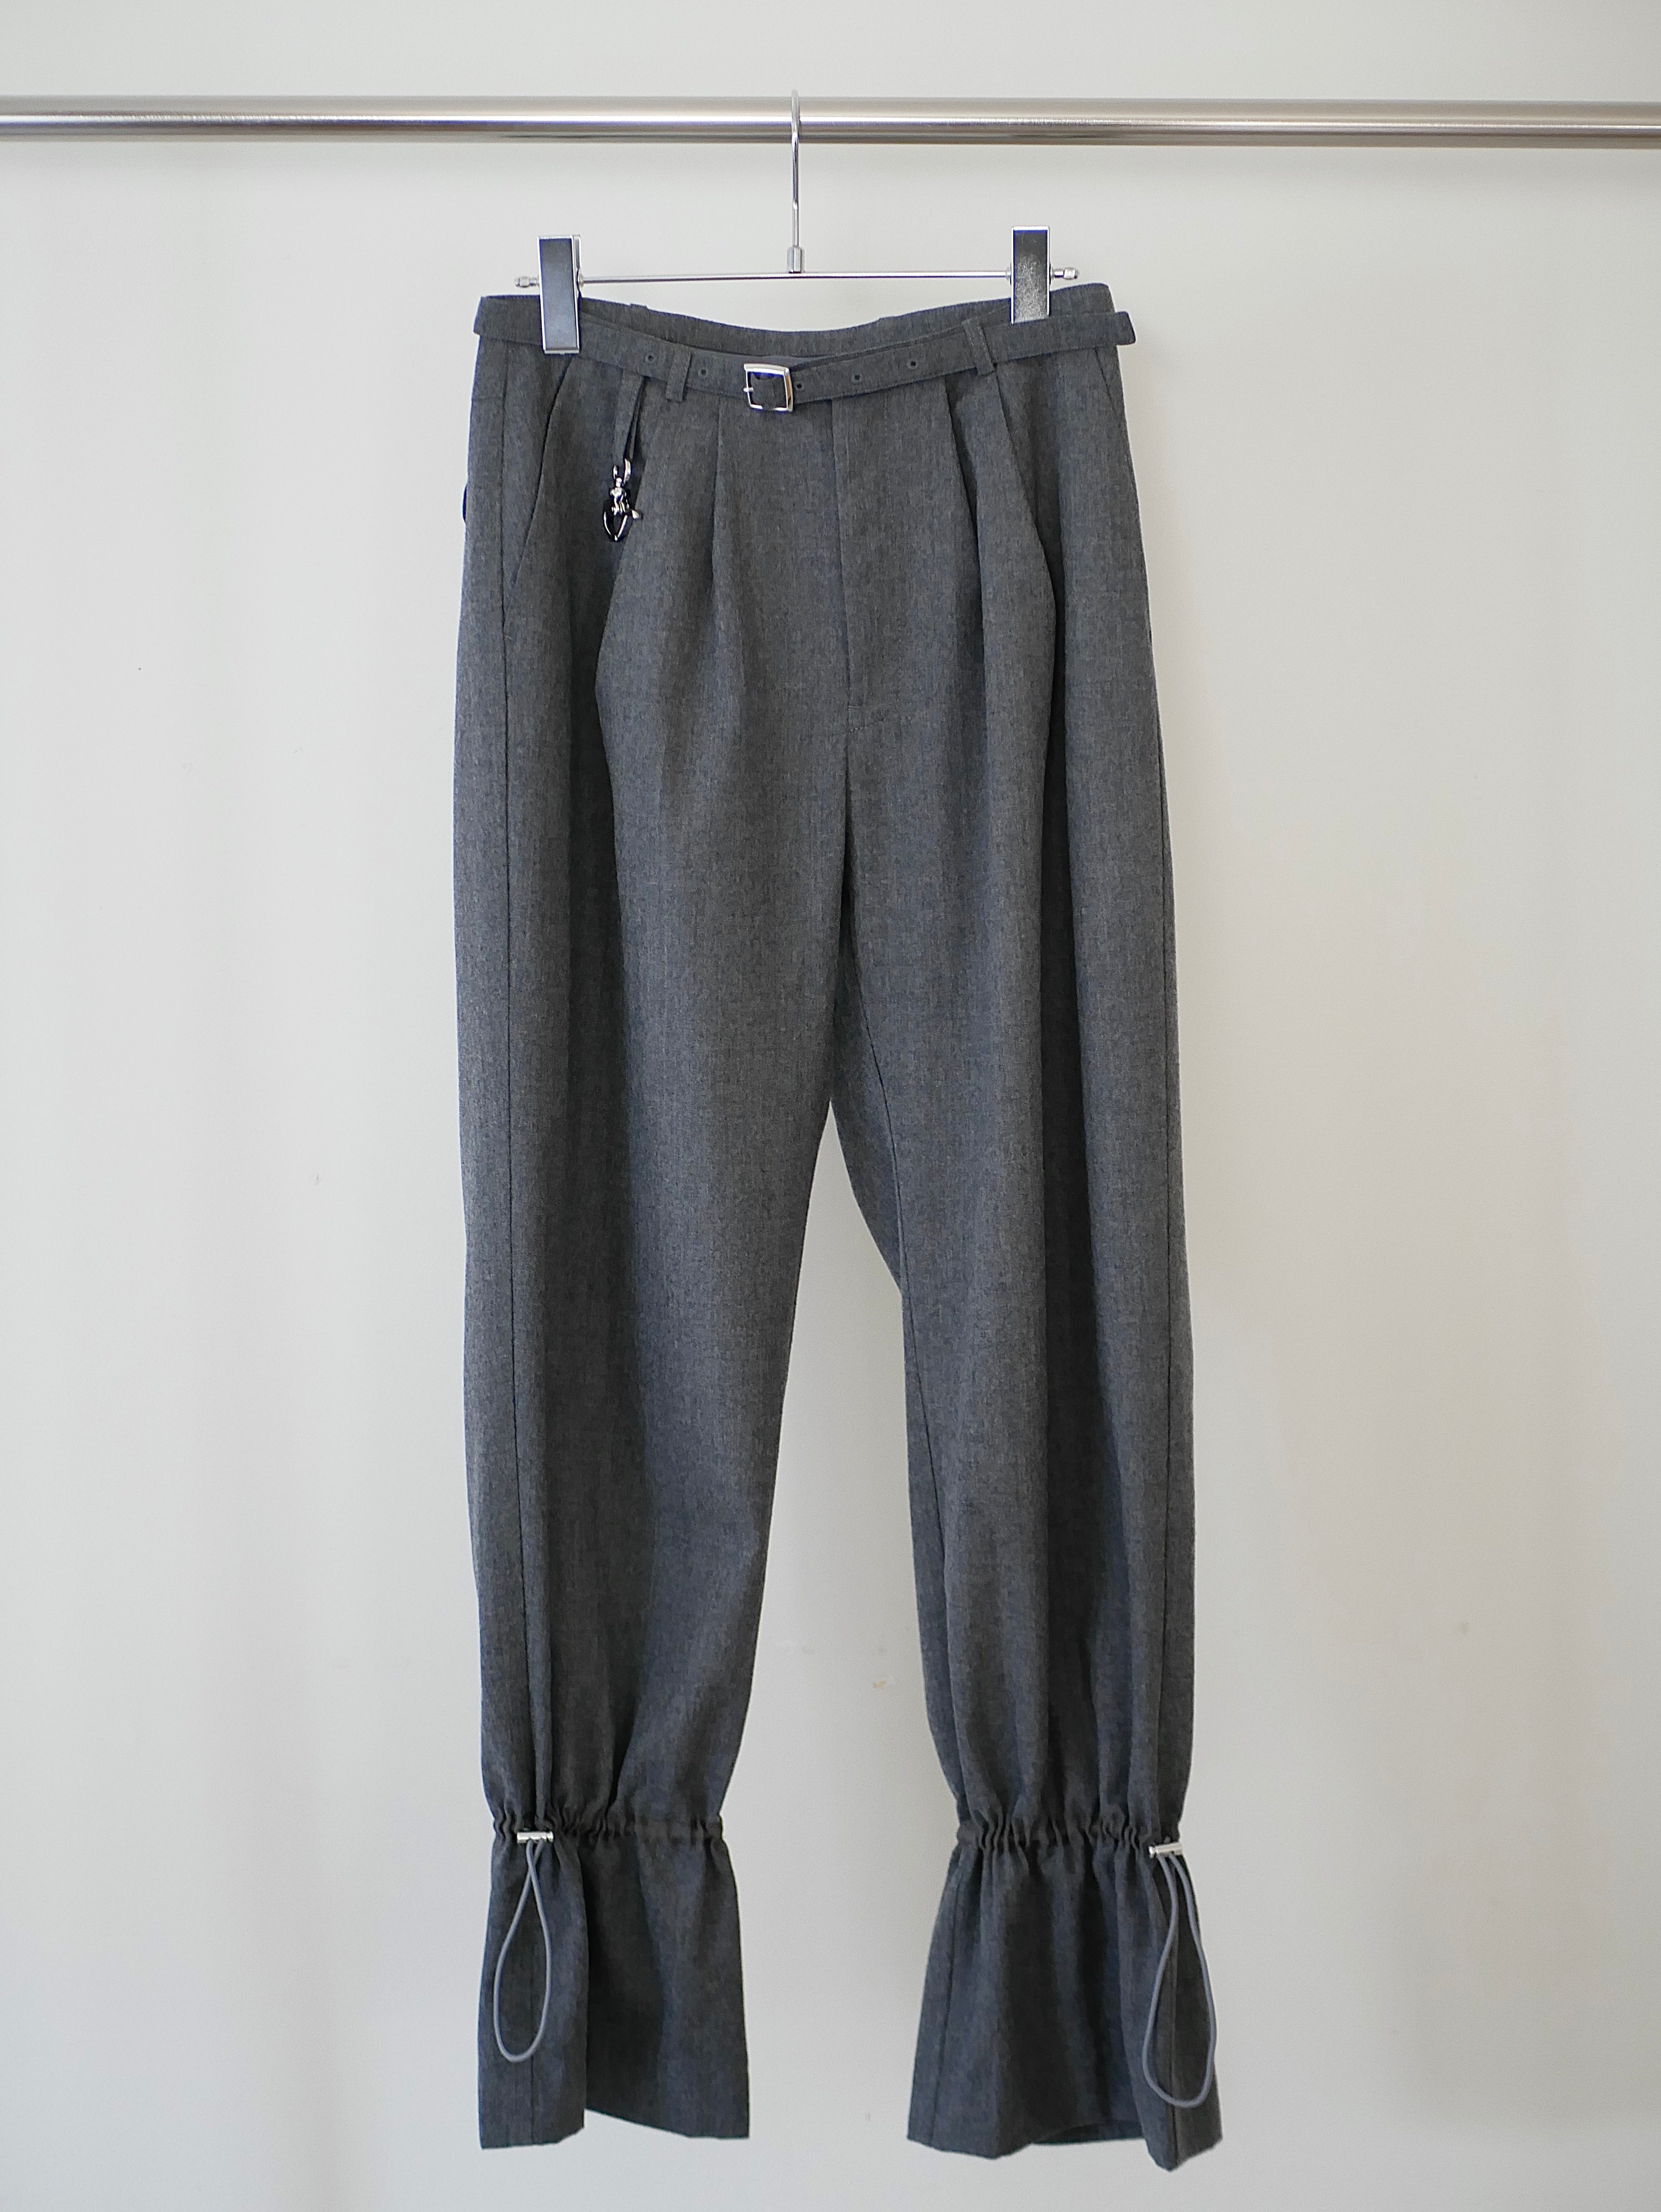 rich〕 Silver hook & shirring pants 【Last one Gray size1 